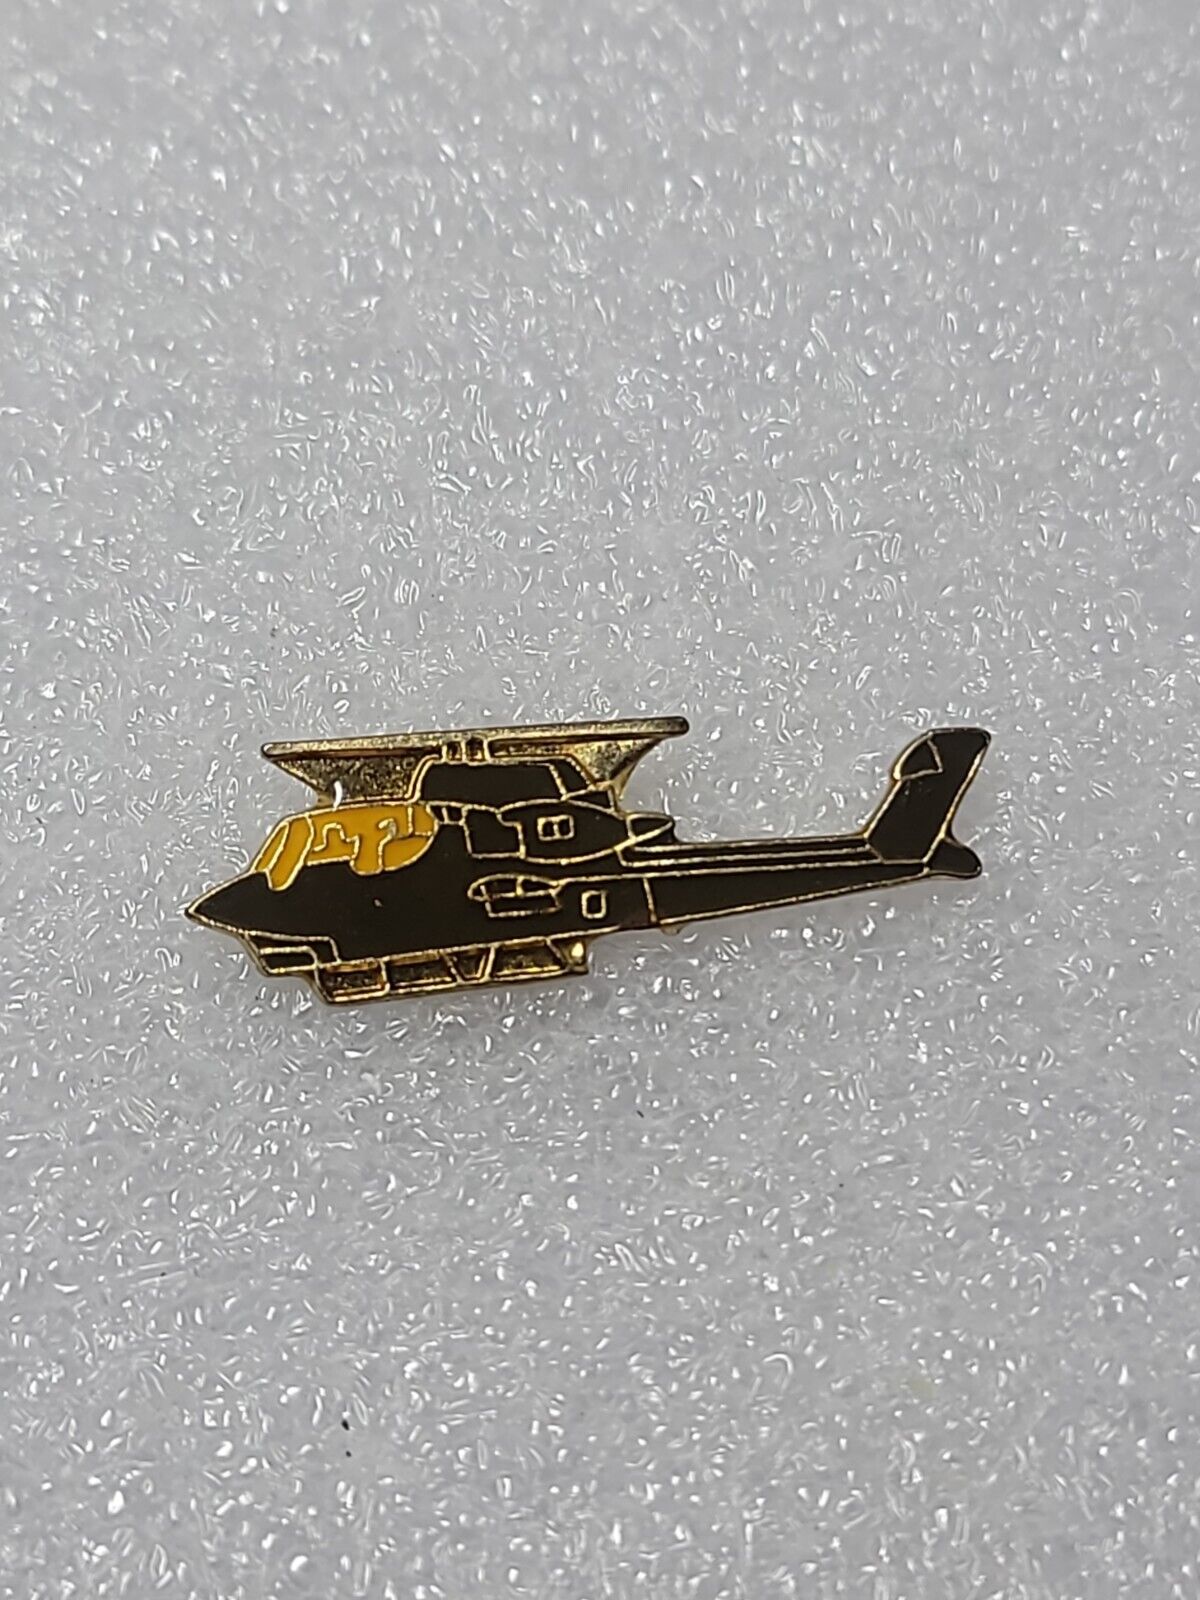 US Military Airplane AH-1G Cobra Attack Helicopter Lapel Hat Pin Army Enamel